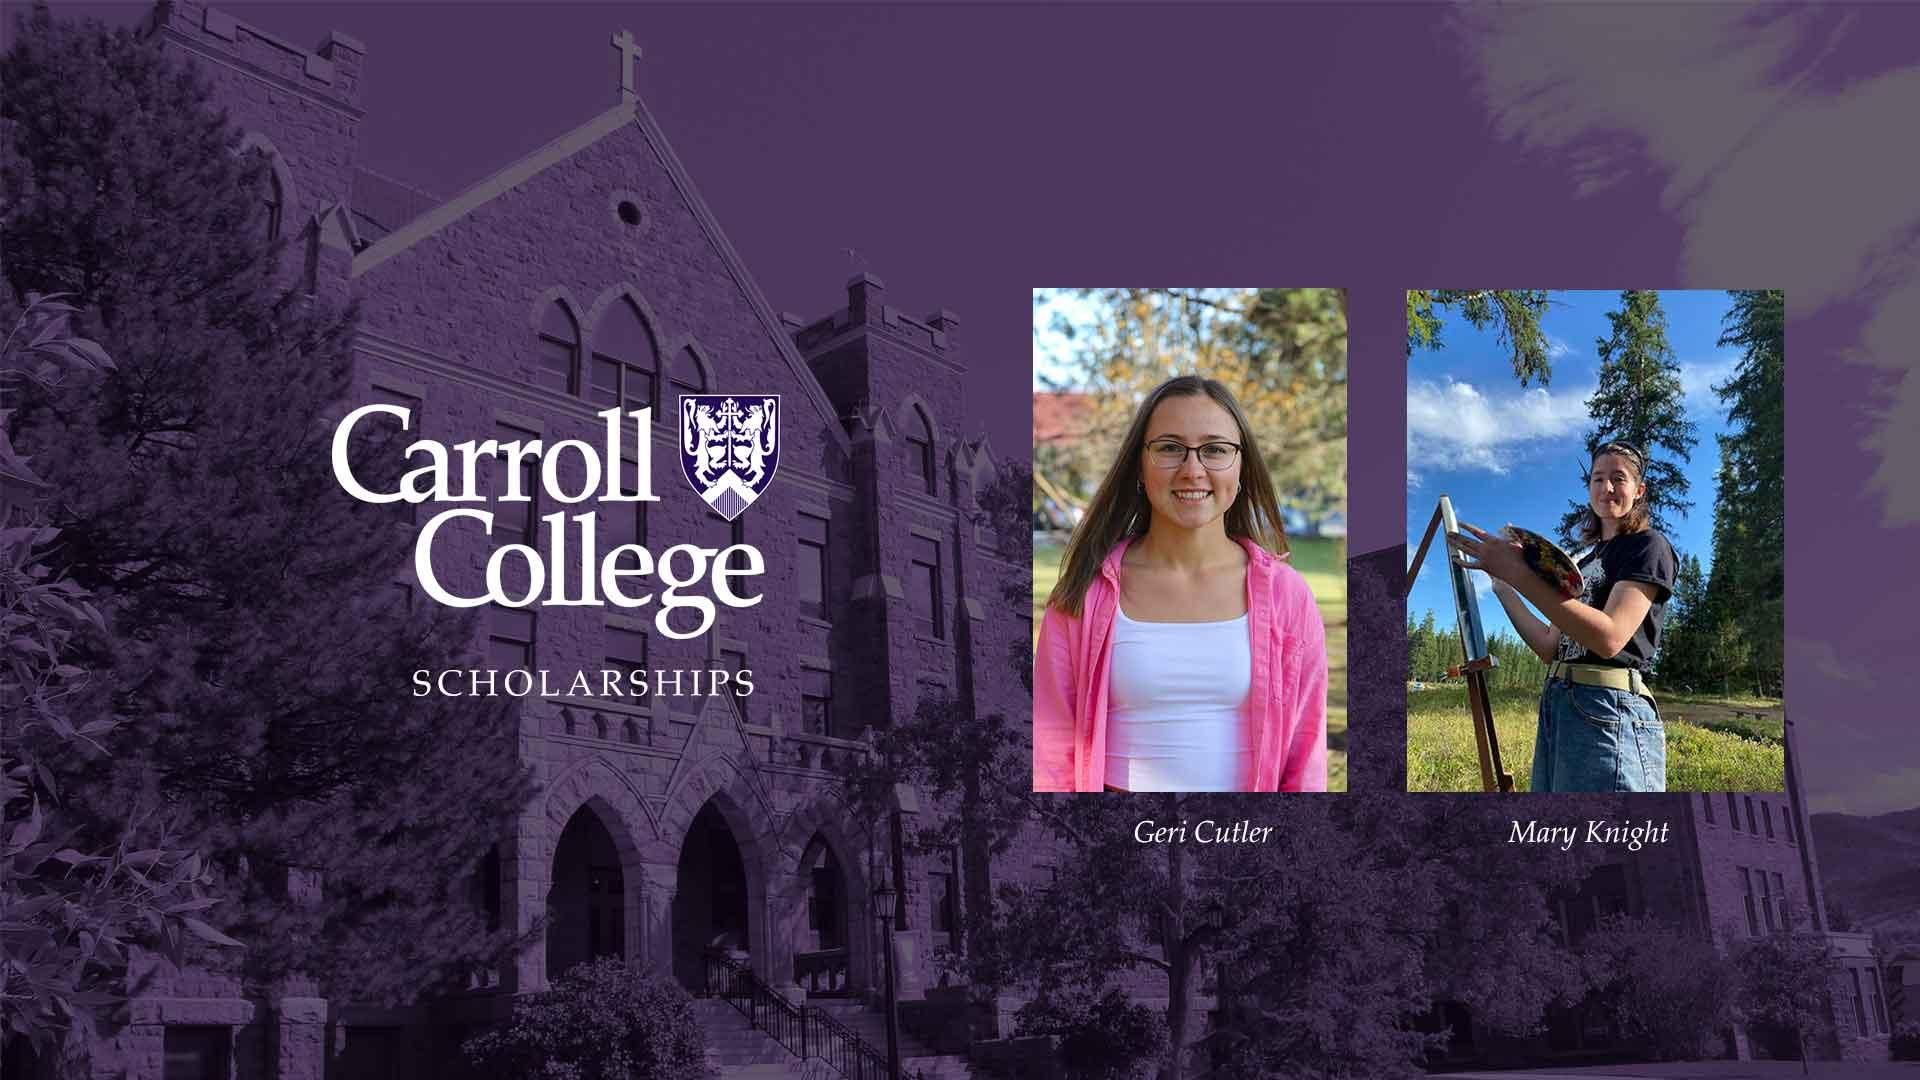 Carroll College students Geri Cutler and Mary Knight